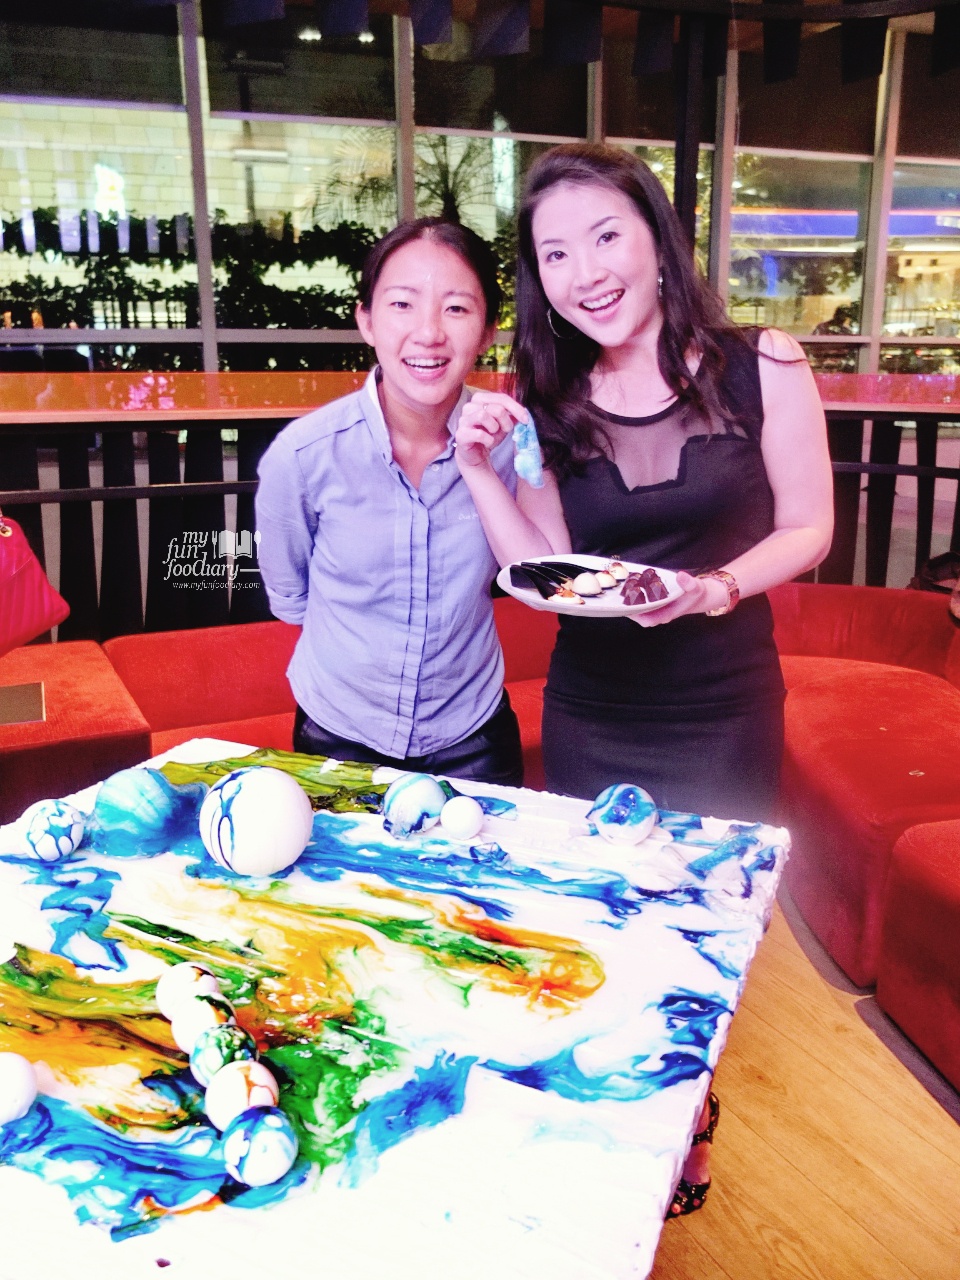 Mullie Marlina with Dessert Queen and Pastry Chef Janice Wong 2am Dessert Bar owner at Moovina Plaza Indonesia for Secret Dinner with Singapore Tourism Board - nyfunfoodiary